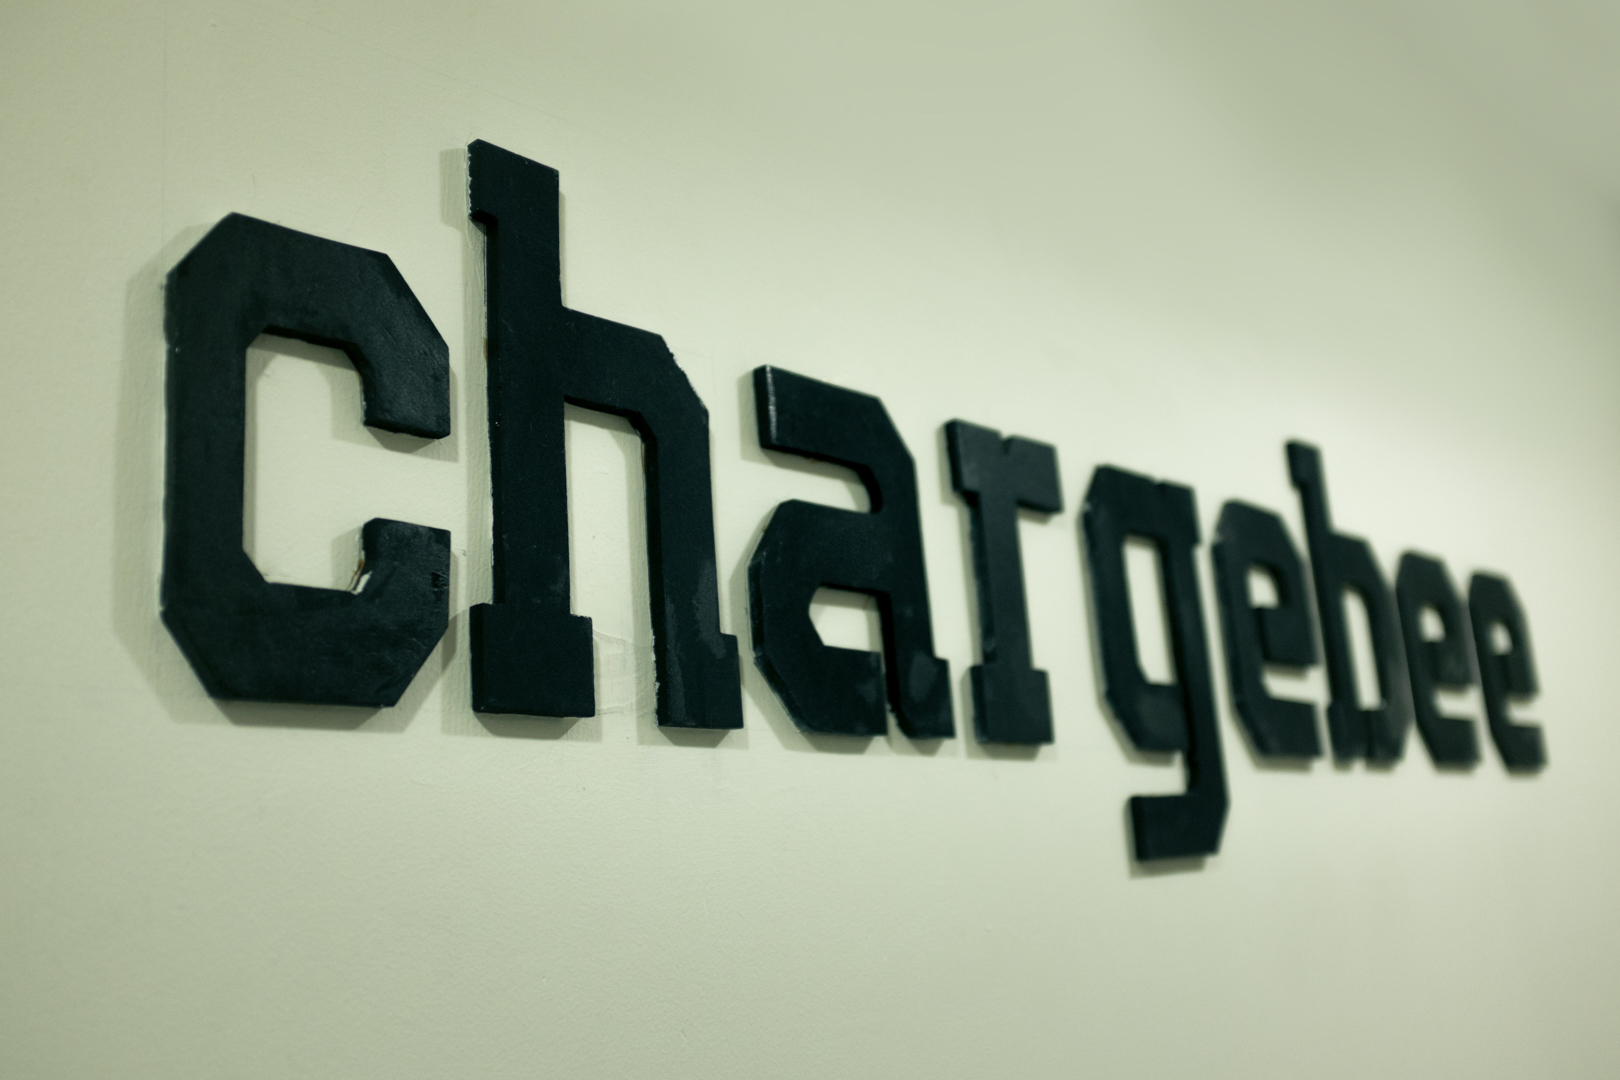 Subscription Billing Startup ChargeBee Raises $5M Series B Led By Tiger Global | TechCrunch